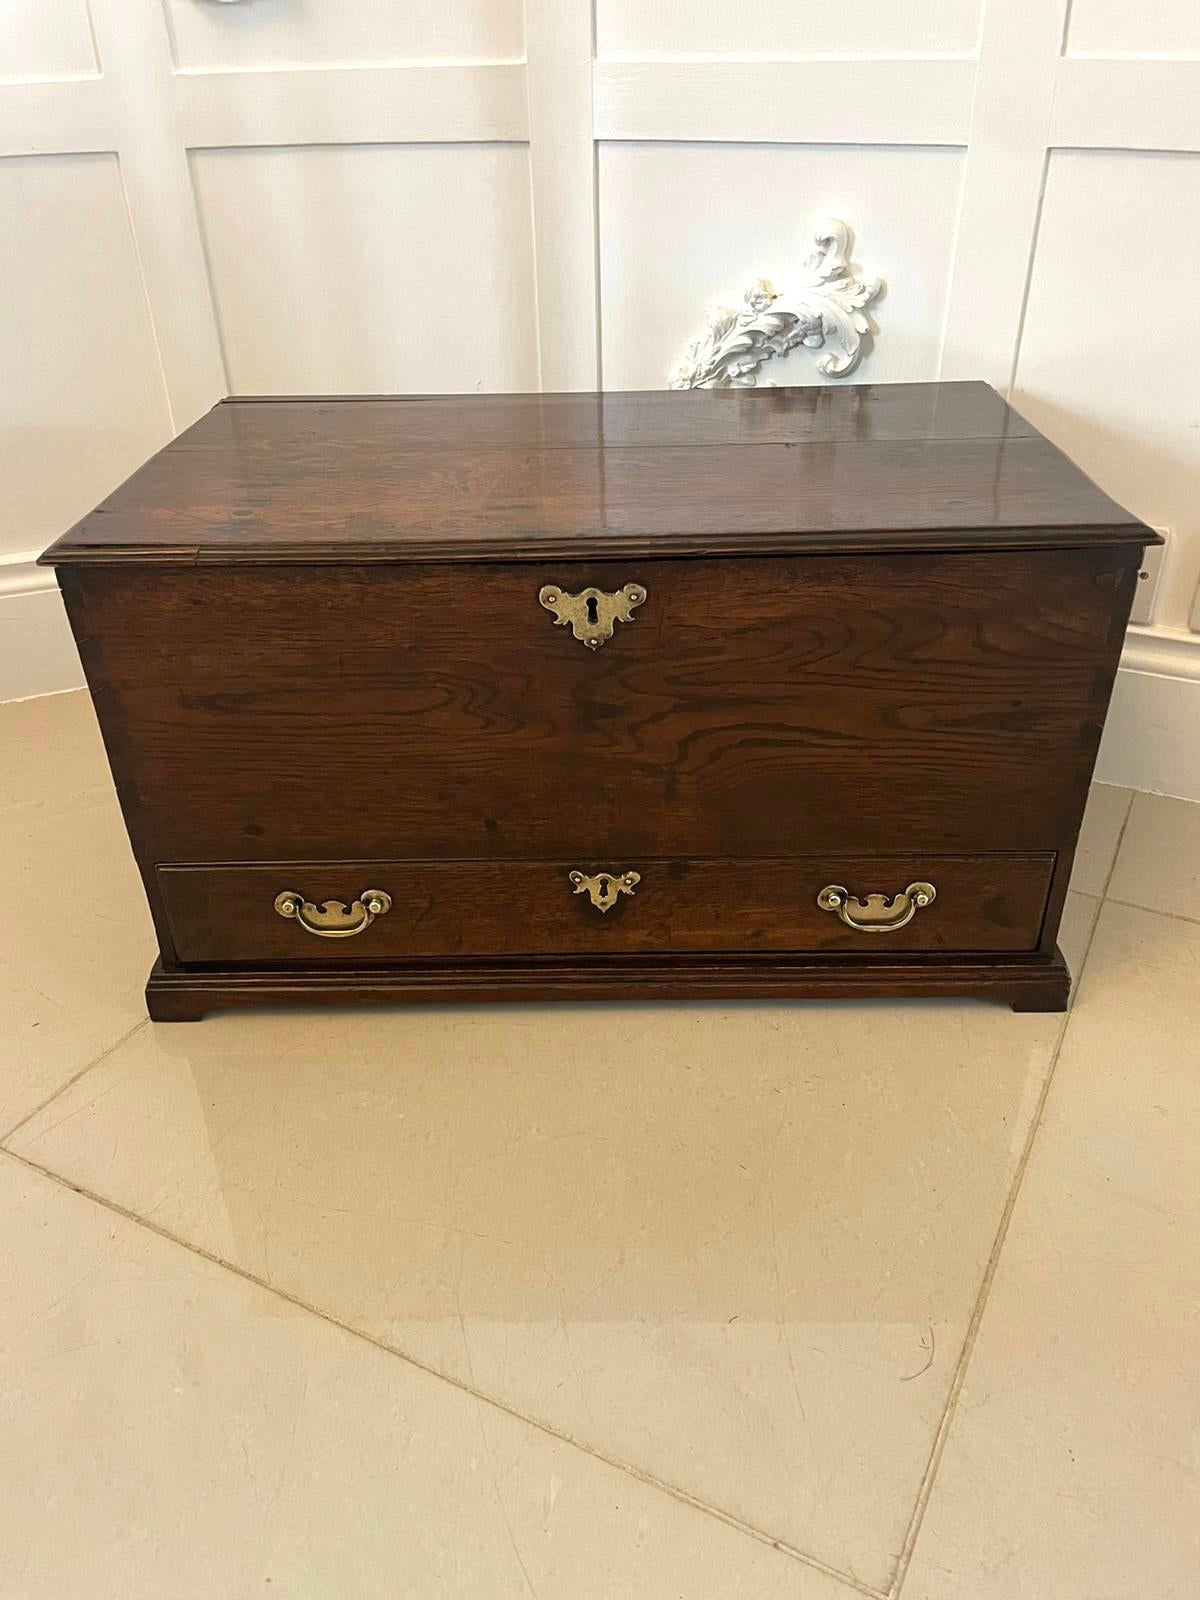 Early Antique 18th century small Welsh oak coffer having a quality oak removable lid with a moulded edge revealing a storage compartment, one long drawer, quality brass handles and escutcheons standing on bracket feet. 

A very desirable example